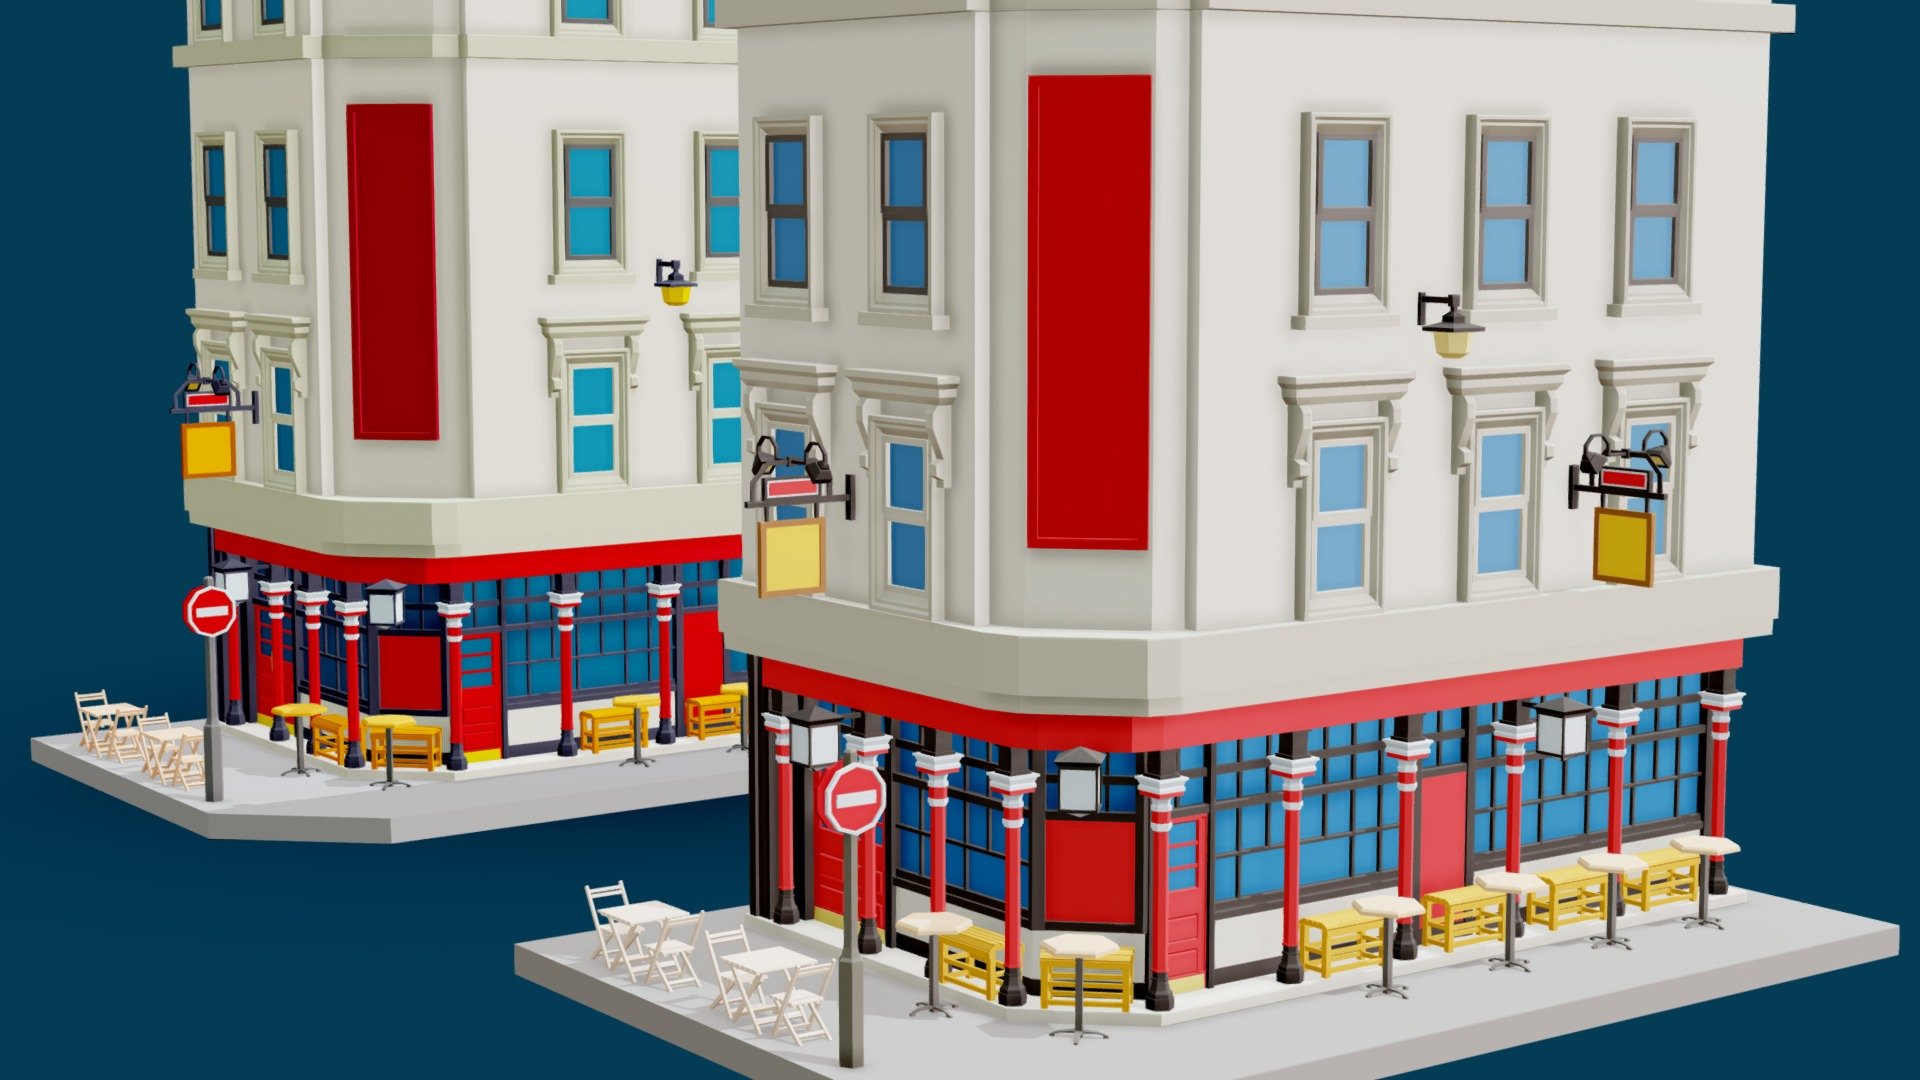 The Coach and Horses, SOHO in low polygon style!




promotion video: https://youtu.be/kOPSTiI-j6I

try it with Adobe After Effect?
3D Model Import in After Effects Workflow: youtu.be/CfoXVKlwM40

It’s ready for game development and animation

Mobile ready models

2 sets of color

Deeply loved London institution with a rich history

Twitter: https://twitter.com/frozenmistdev

Instagram: https://www.instagram.com/frozenmistadventure/

Facebook: https://www.facebook.com/FrozenMistAdventure

Youtube: https://www.youtube.com/channel/UC1ADZ8xSCKDDizmStC5vkow

Other Unity3D Assets: https://forum.unity.com/threads/953333/

Home page: https://www.frozenmist.com/ - FM polygon UK The Coach and Horses SOHO - Buy Royalty Free 3D model by FrozenMistDev 3d model